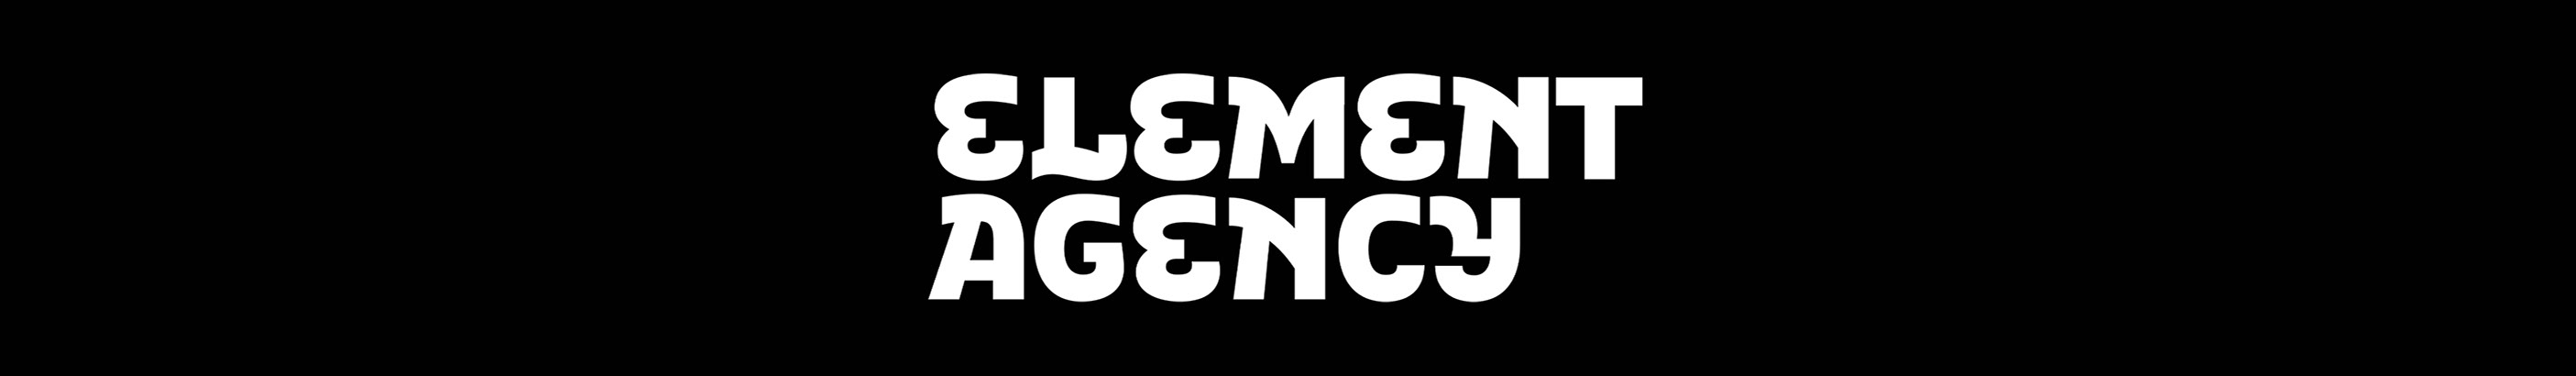 Element Agency's profile banner